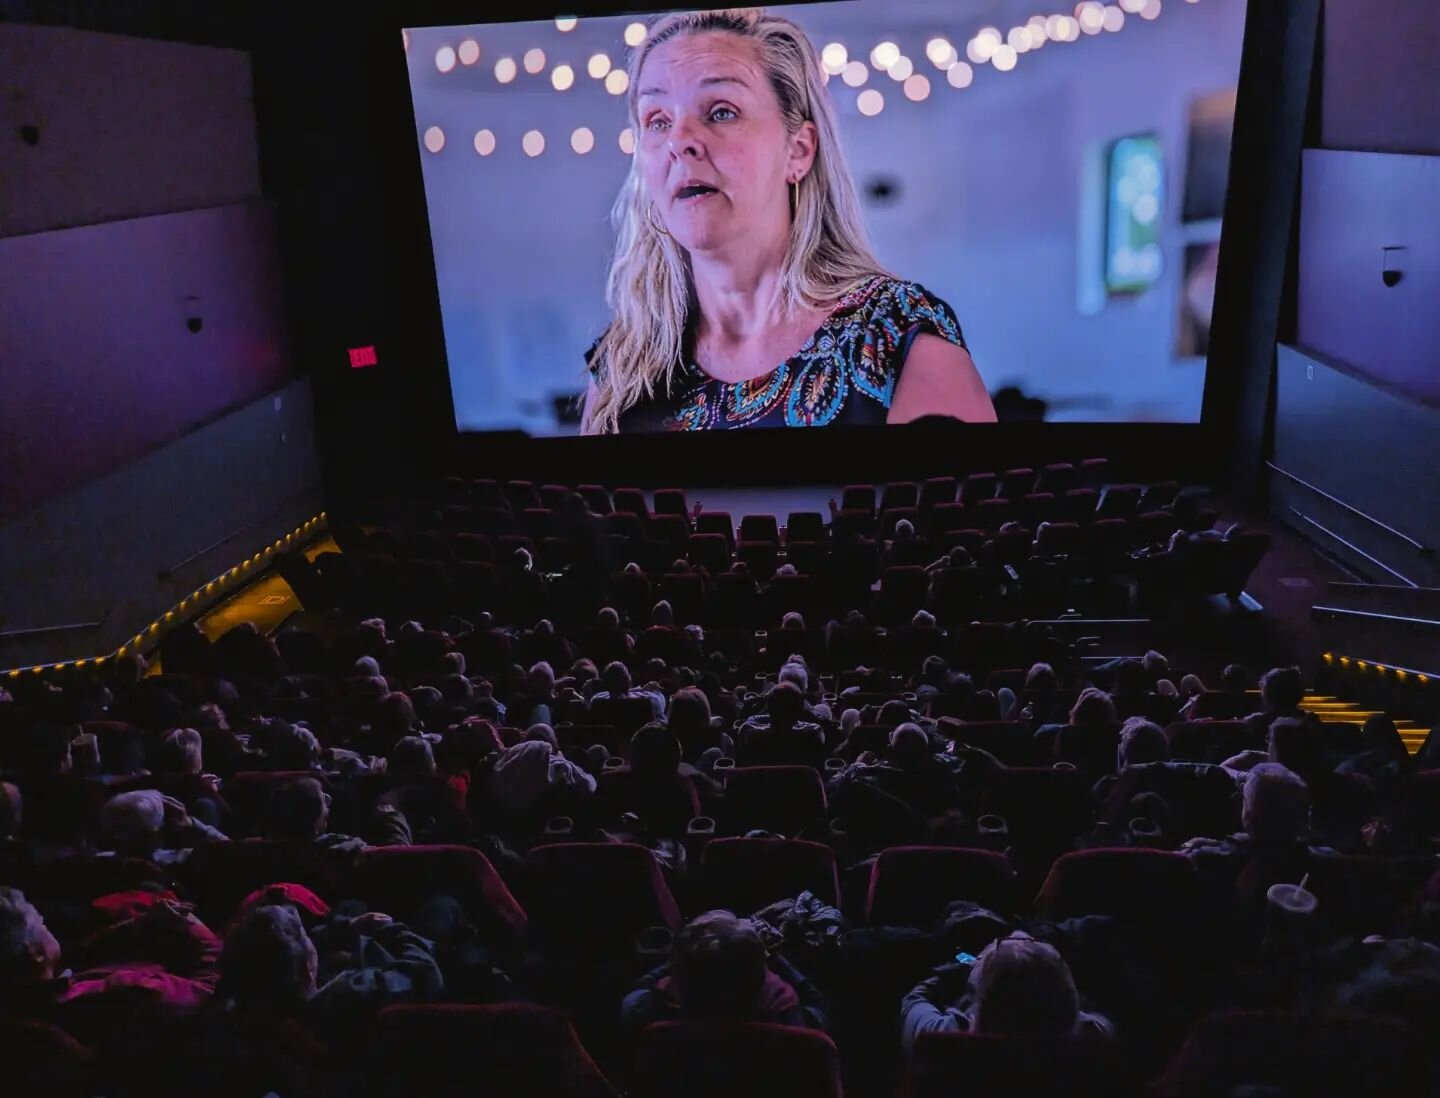 HAPPENING NOW! Across America in nearly 1000 theaters A CASE FOR LOVE is being watched for the very first time. The Grace-Based Films team is in NYC at the AMC Theatres Empire 25 where they had to add a second 7p and a 10p show! Where are you/did you